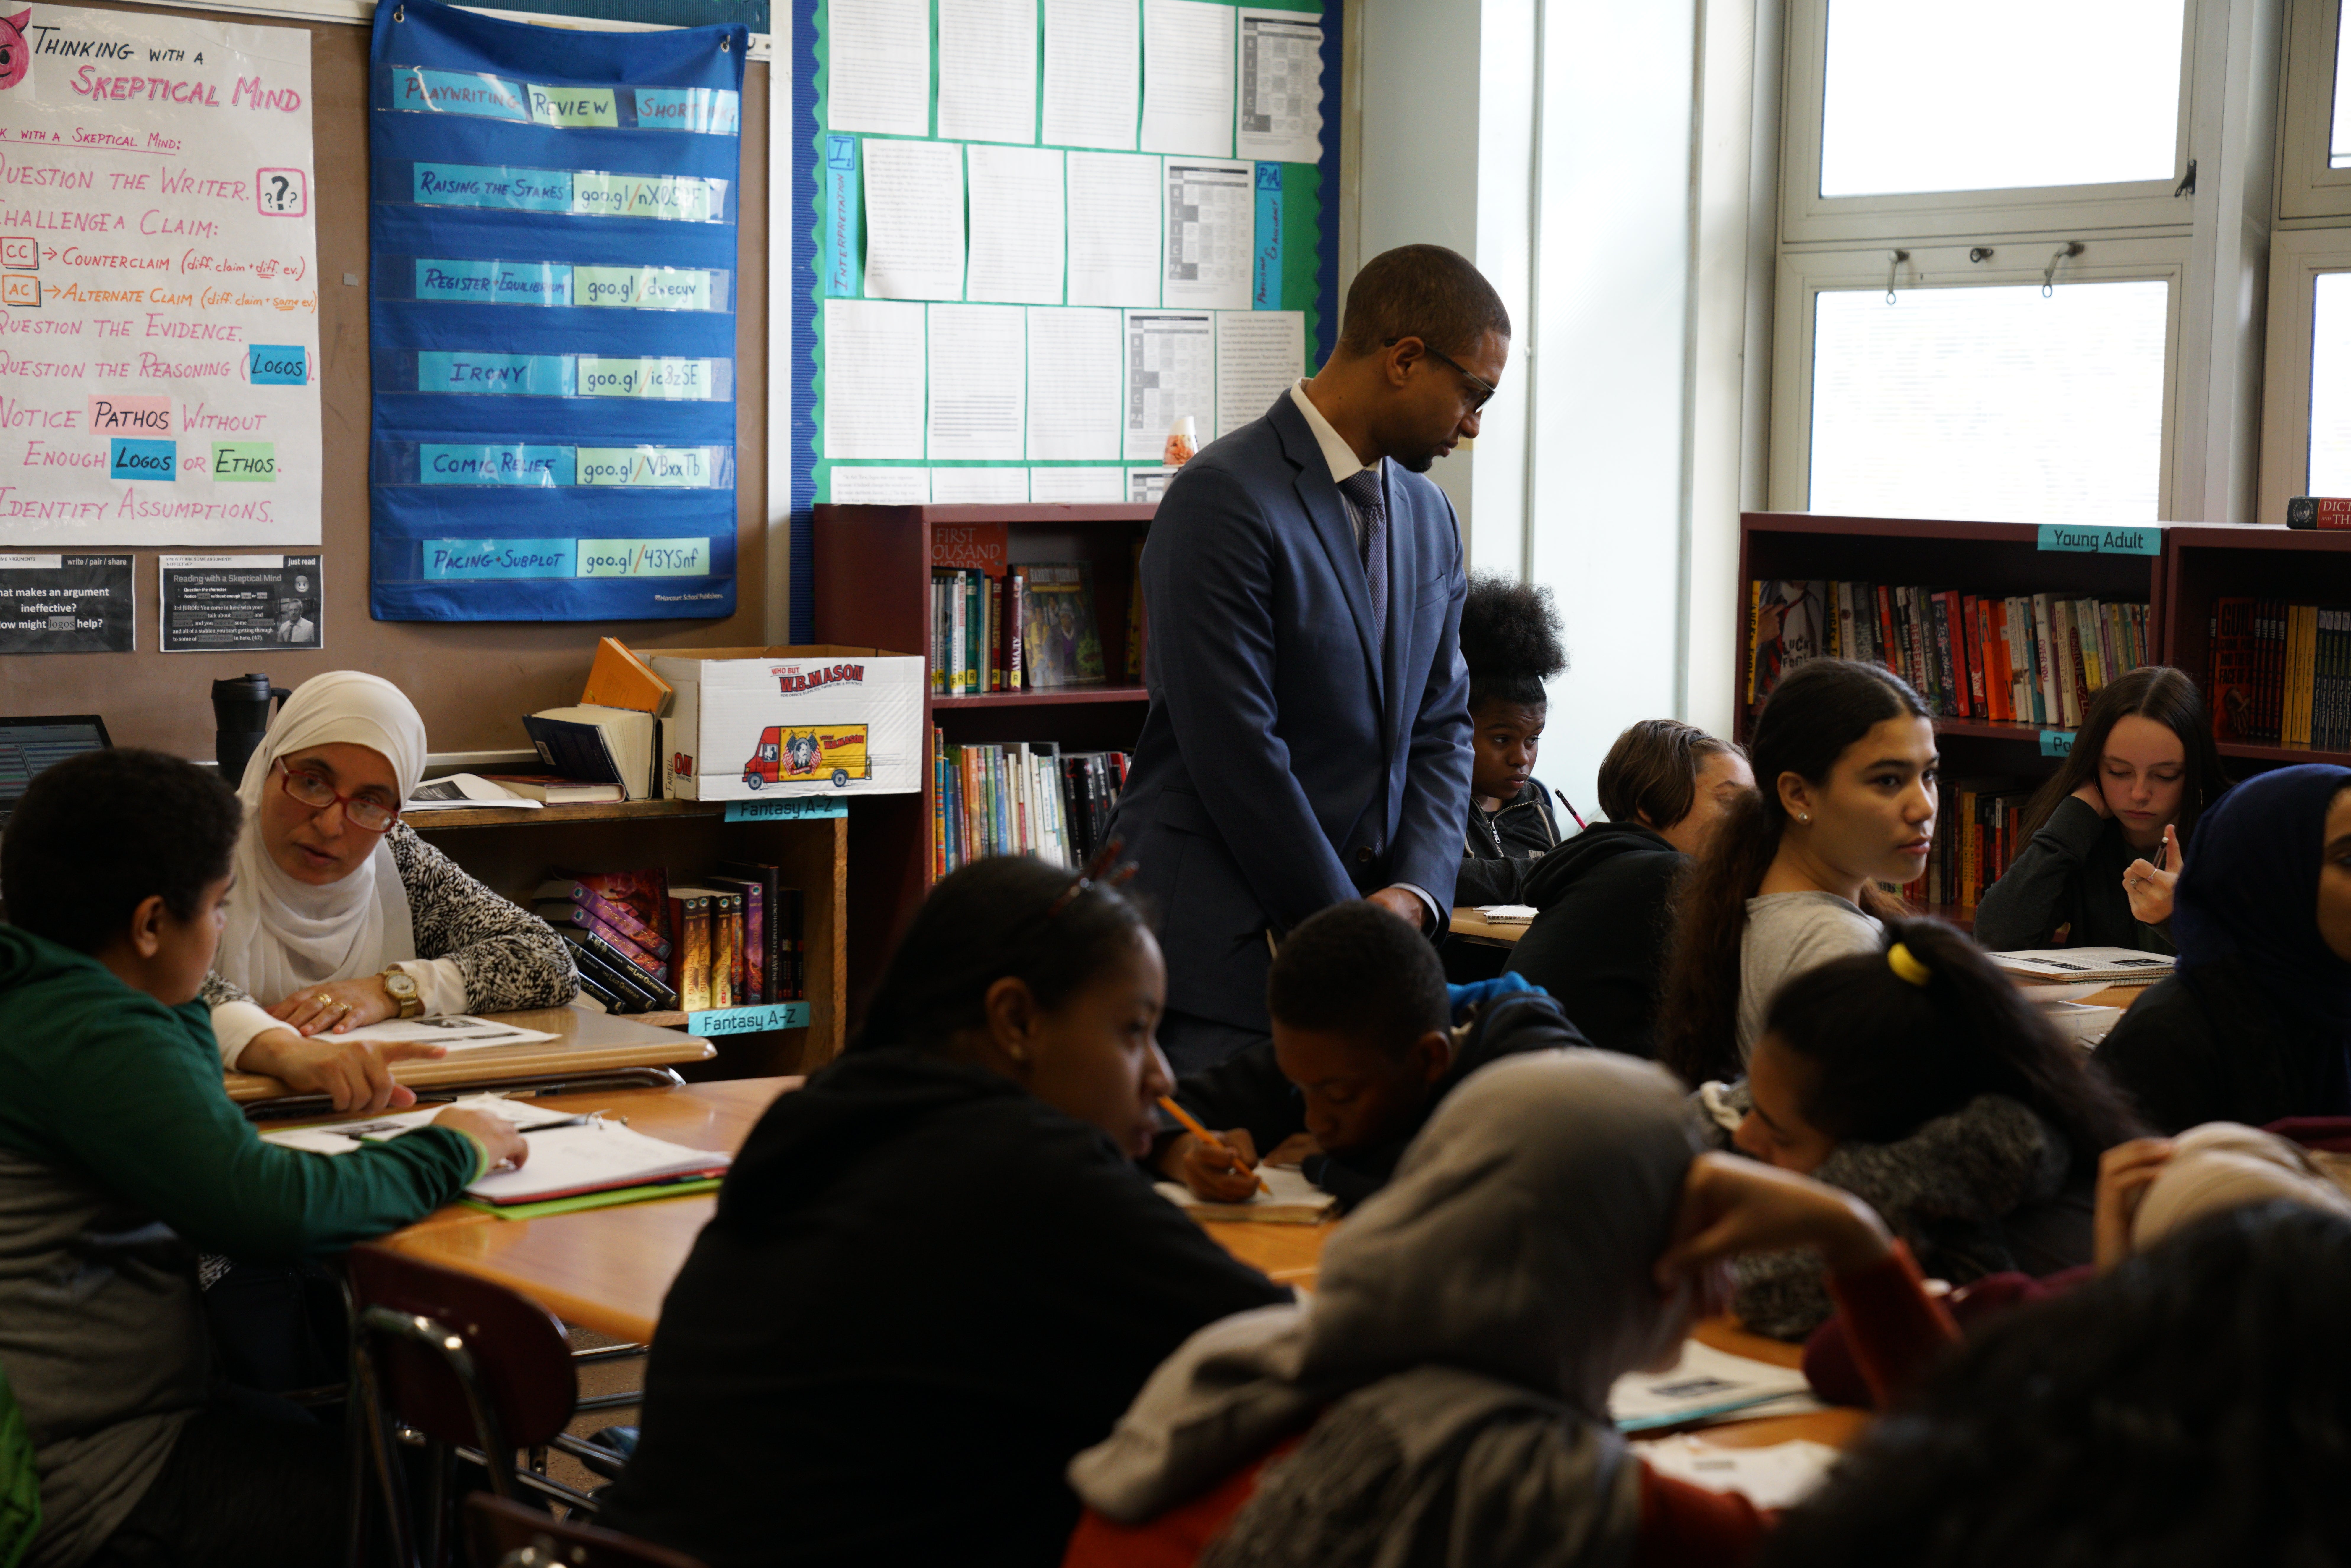 A school principal observes students in their classroom.